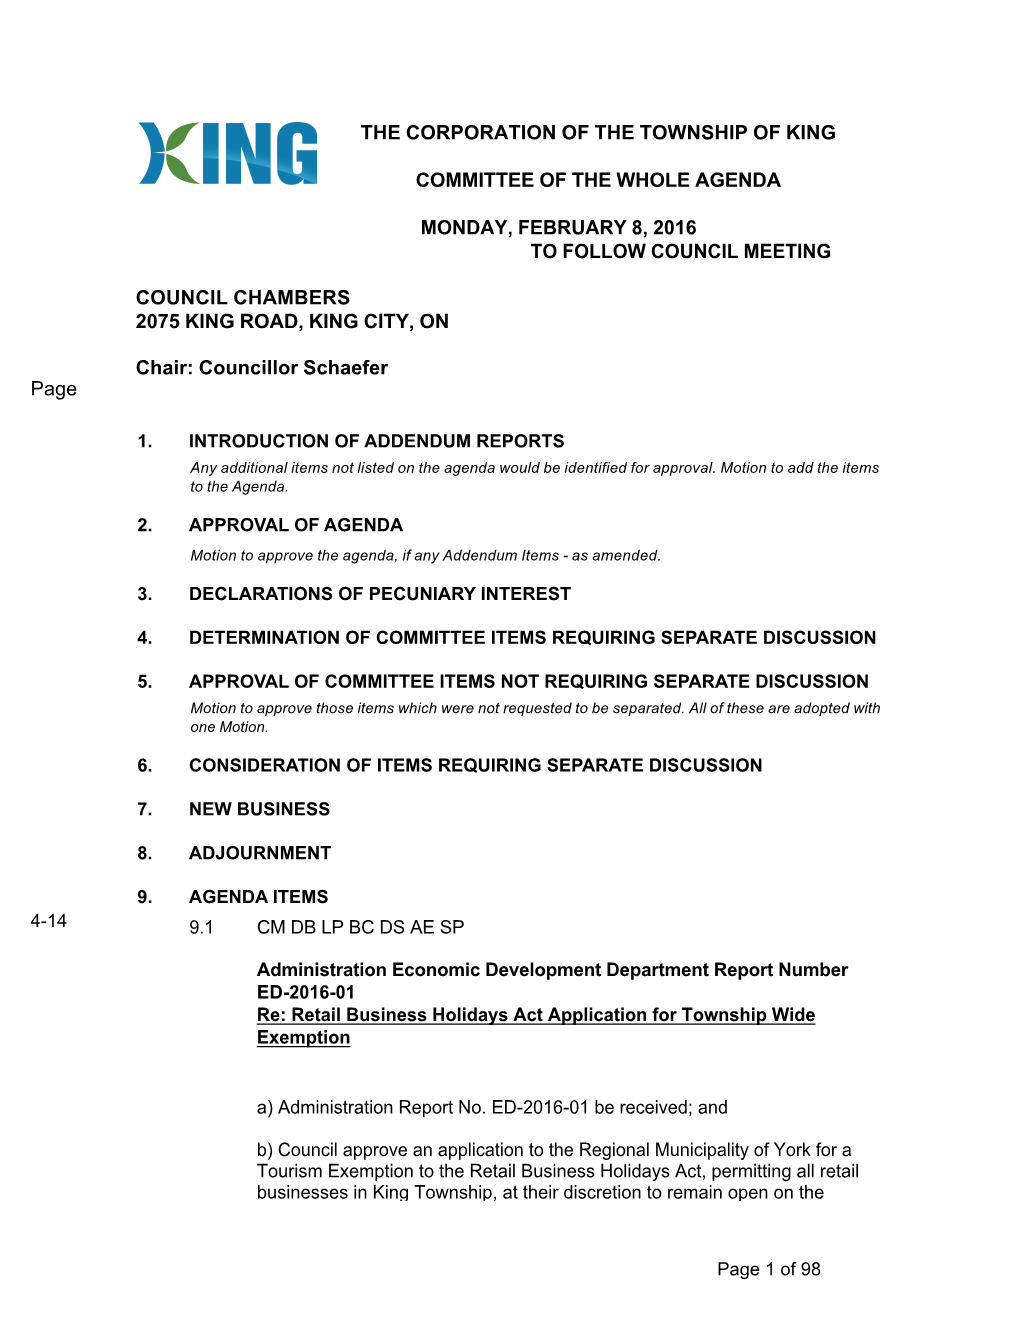 The Corporation of the Township of King Committee